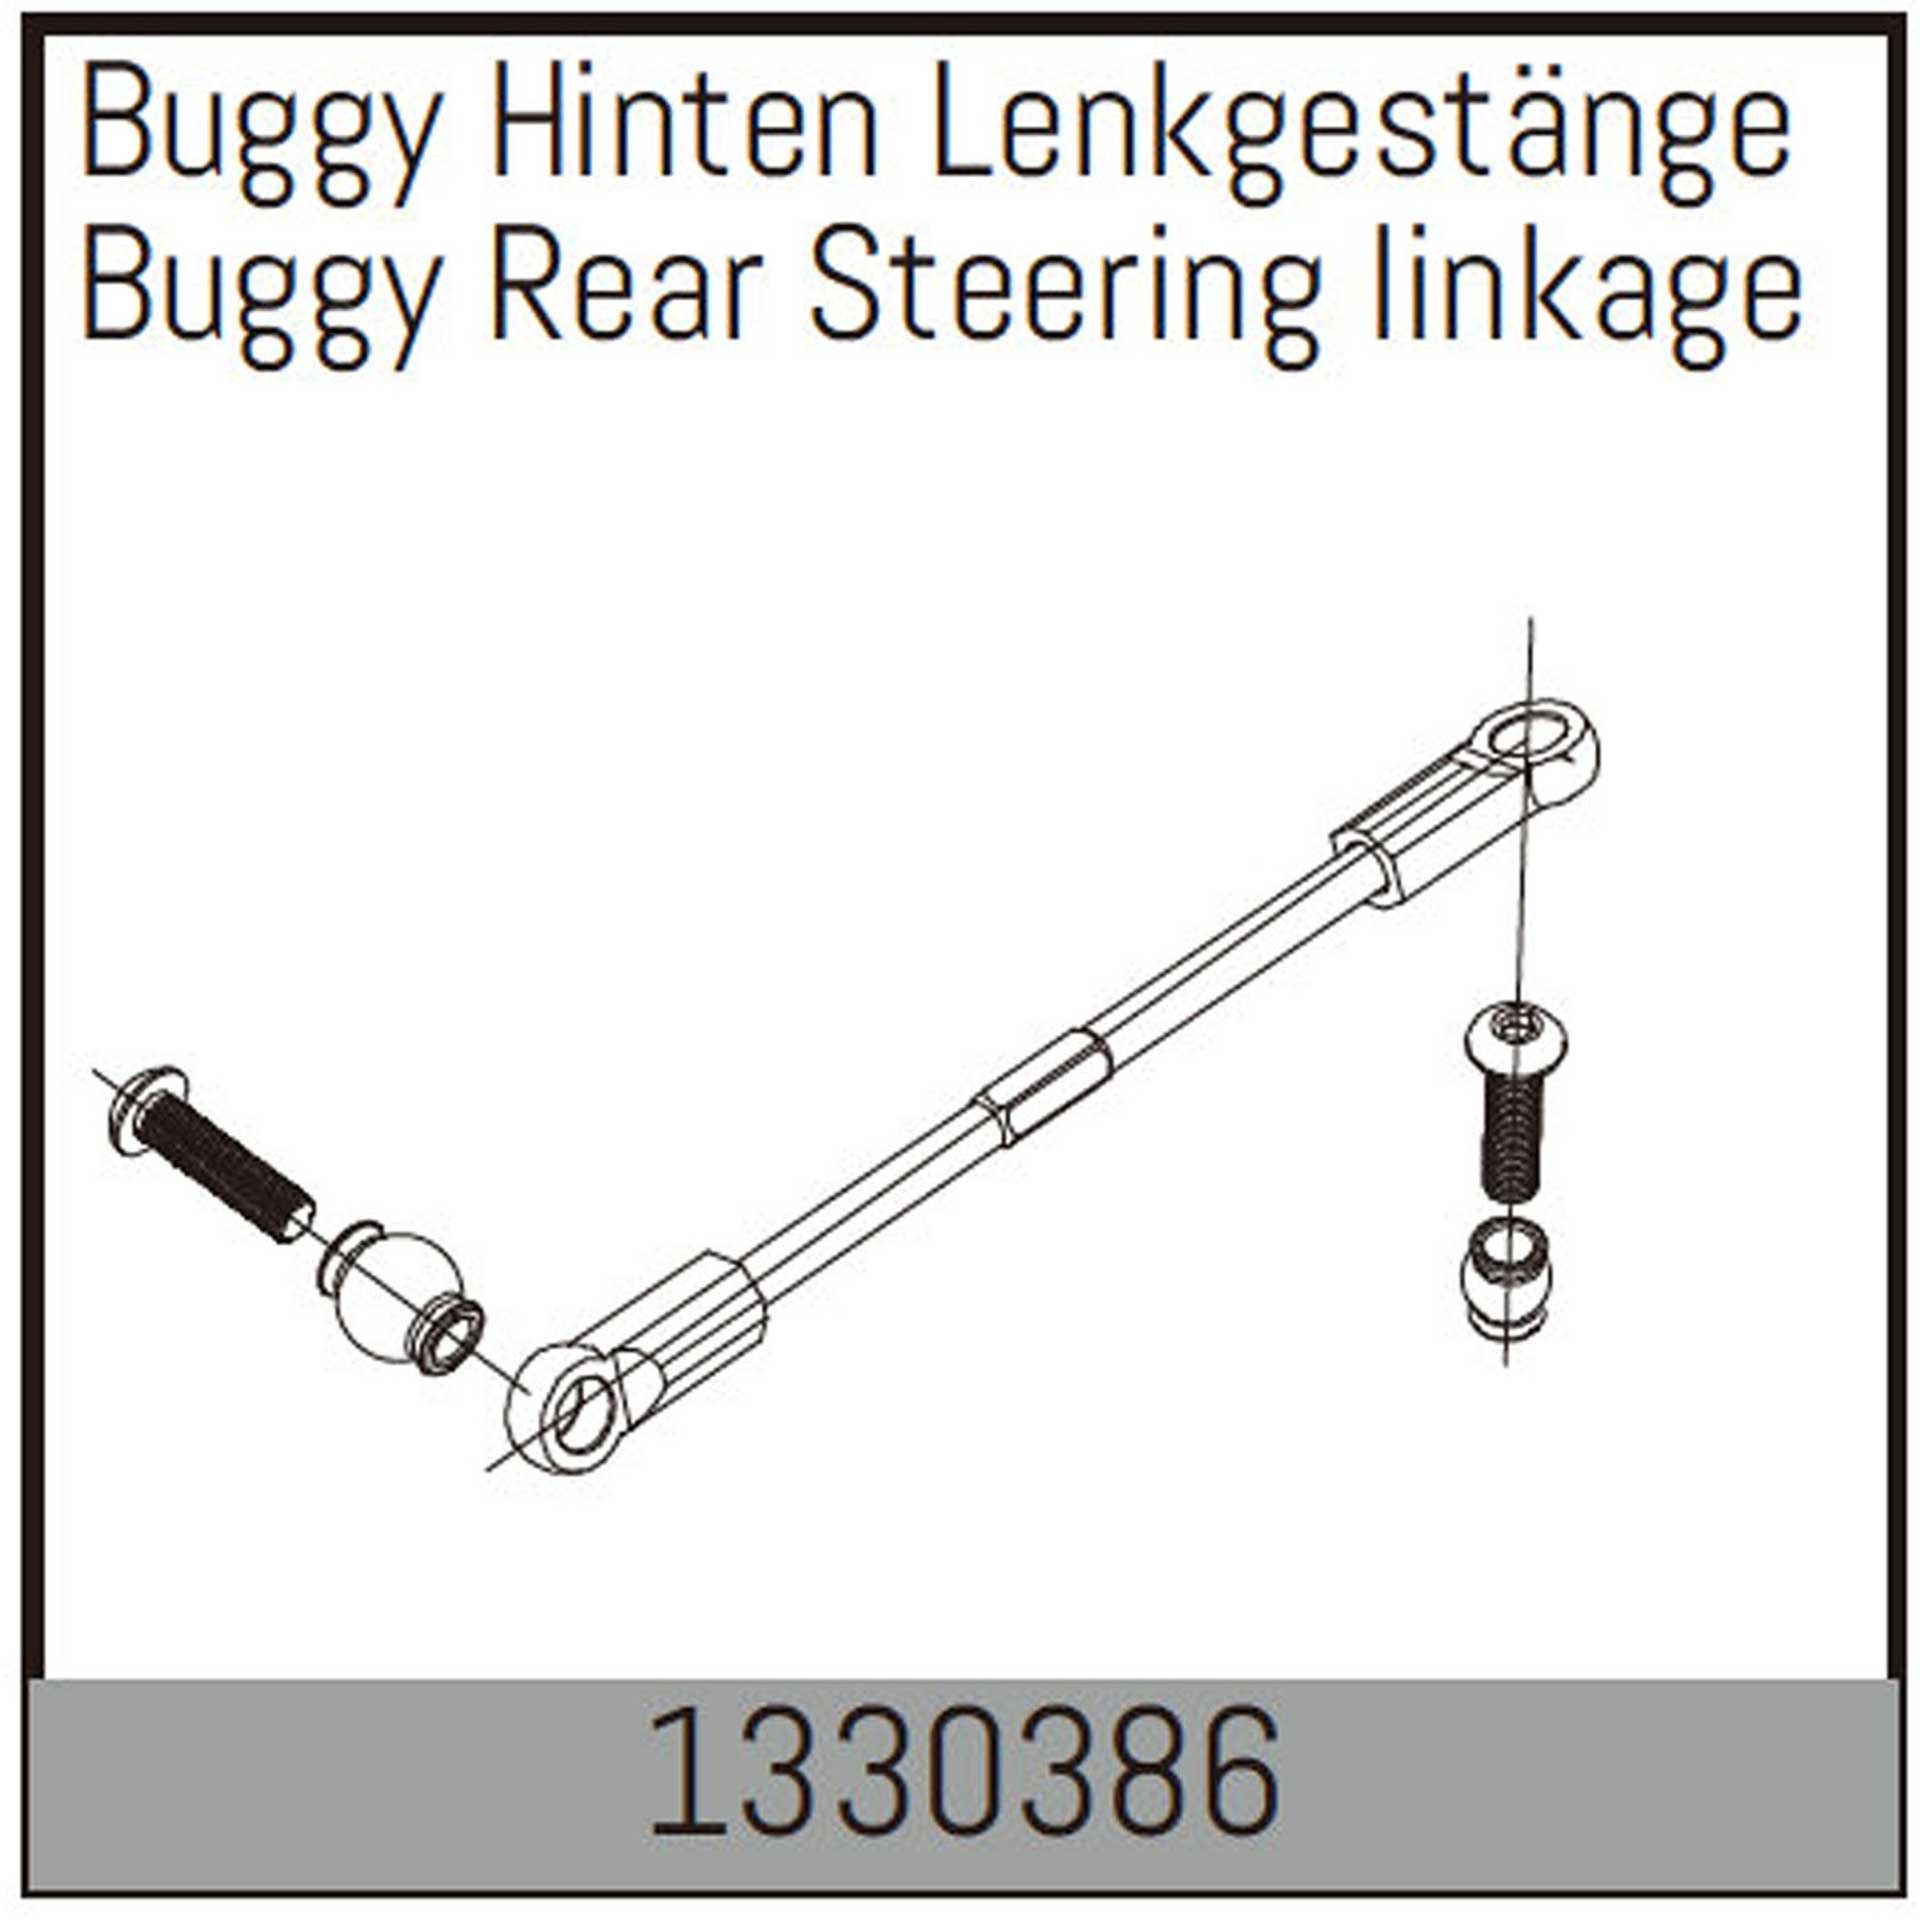 ABSIMA REAR STEERING LINKAGE FOR BUGGY